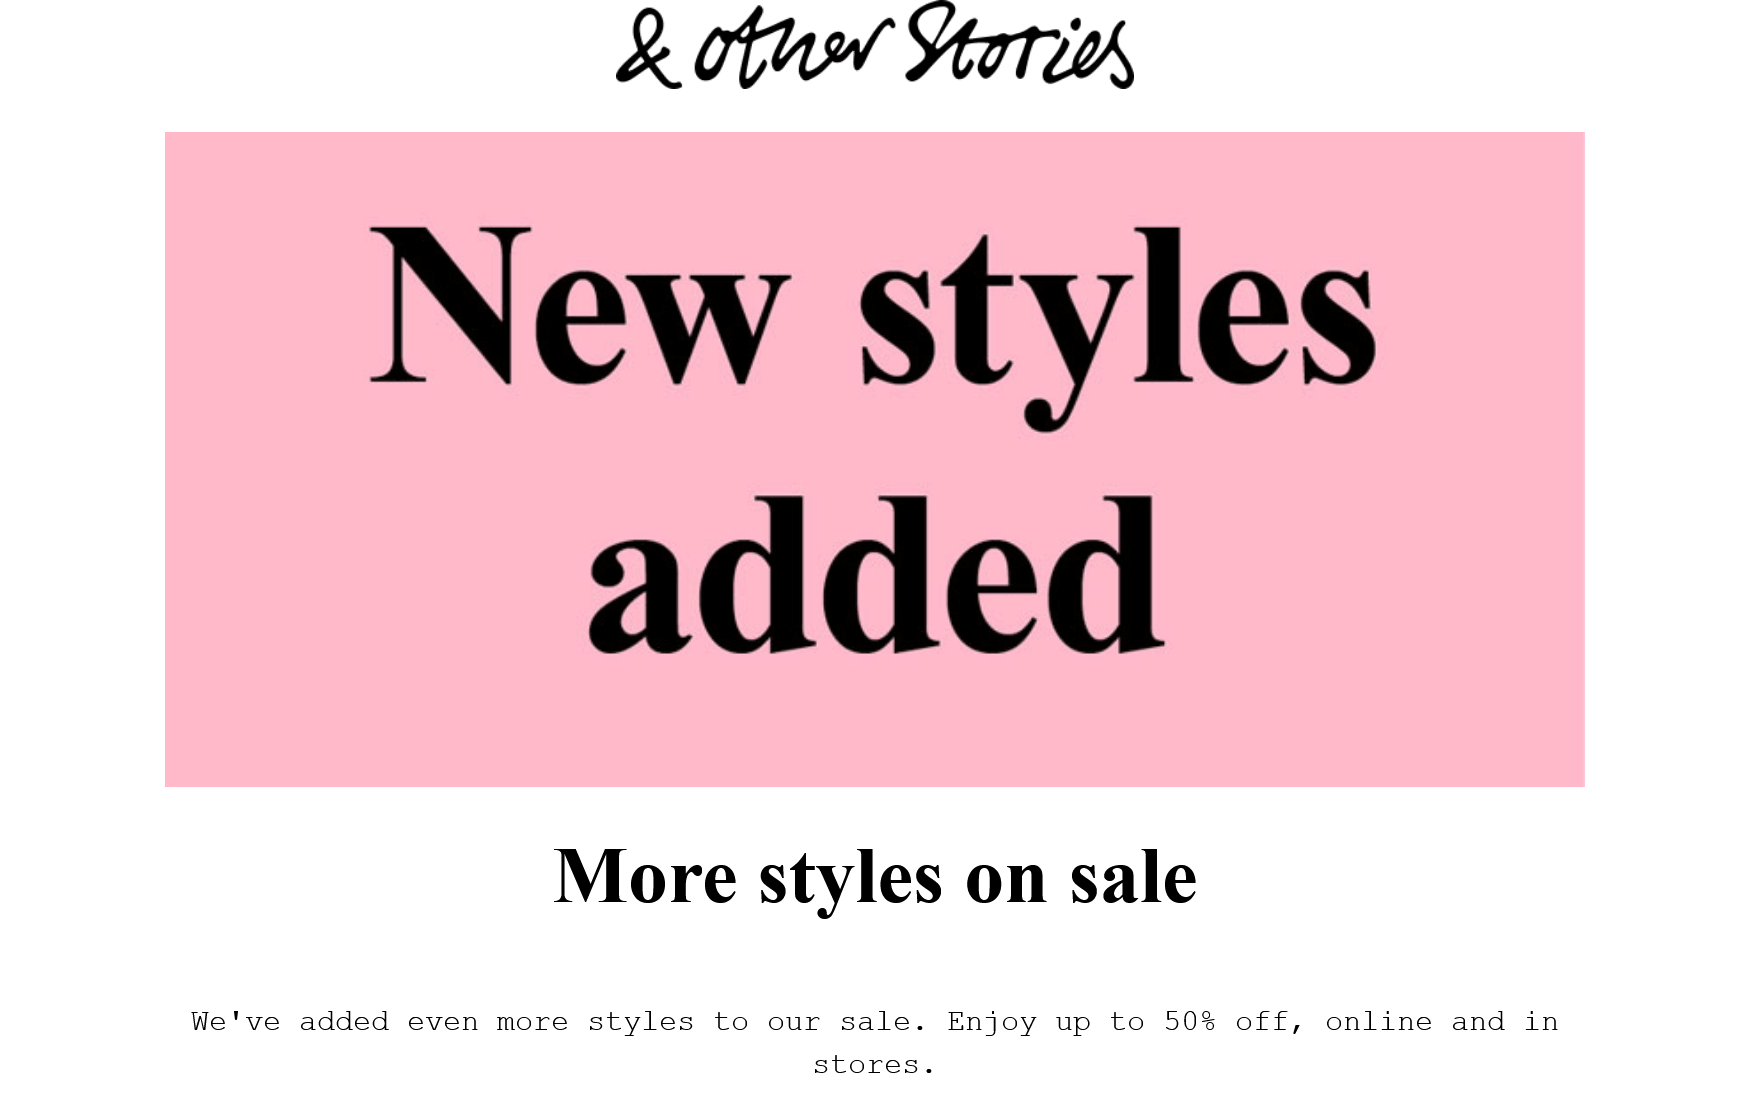 & Other Stories stores Coupon  Various styles 50% off at & Other Stories by H&M #otherstories 